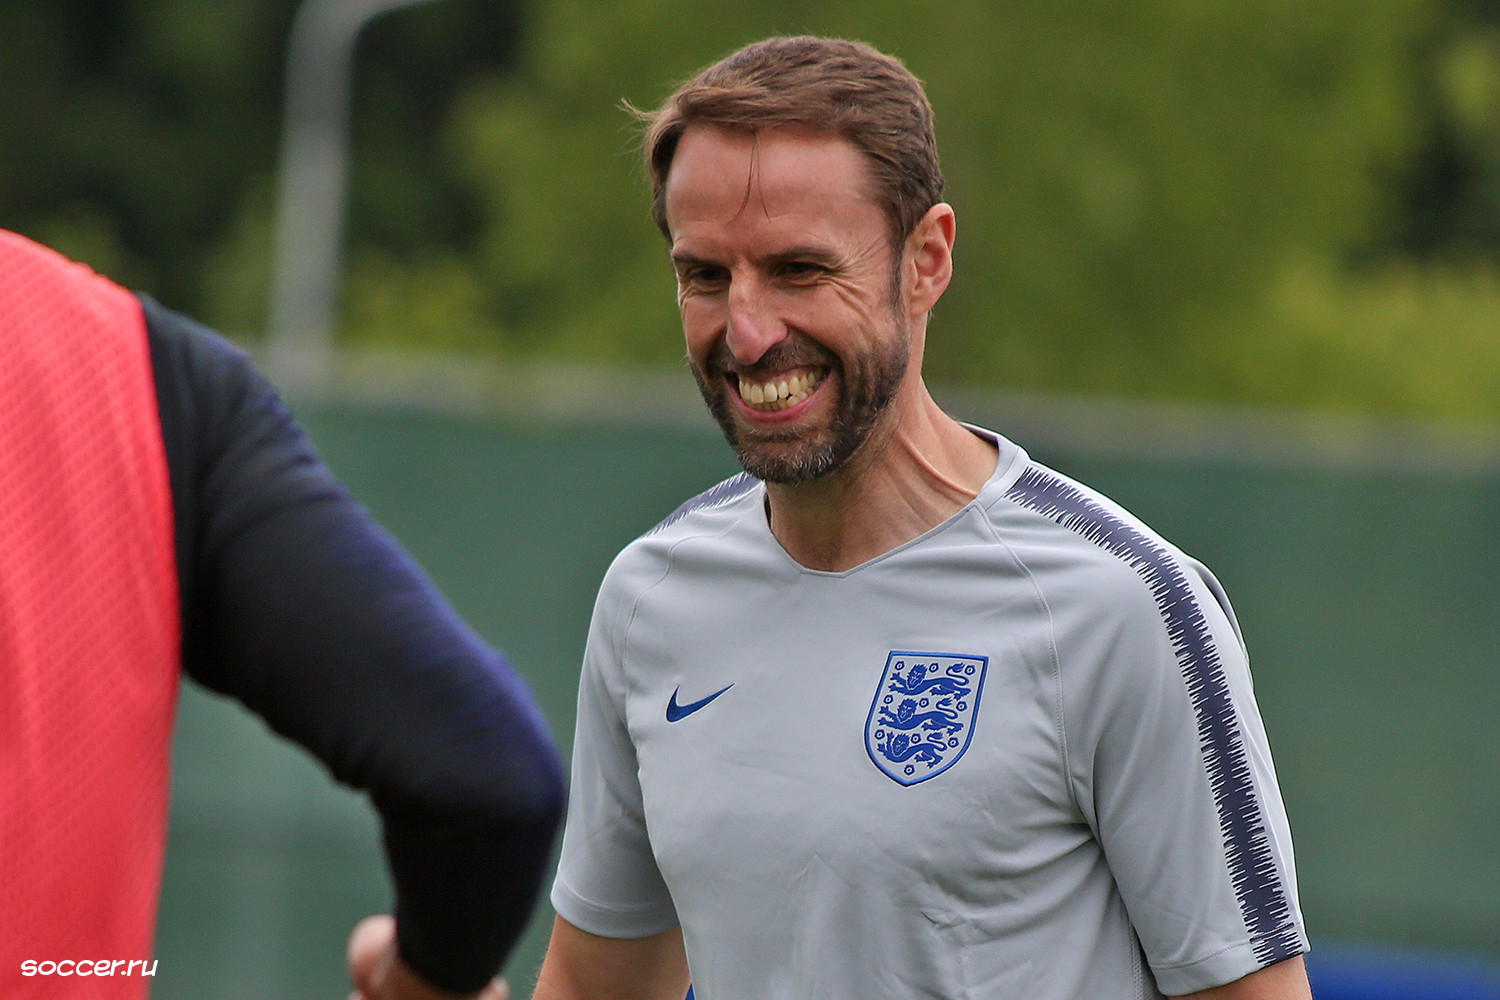 Gareth Southgate shows us a possible 'new England' for a post-pandemic future